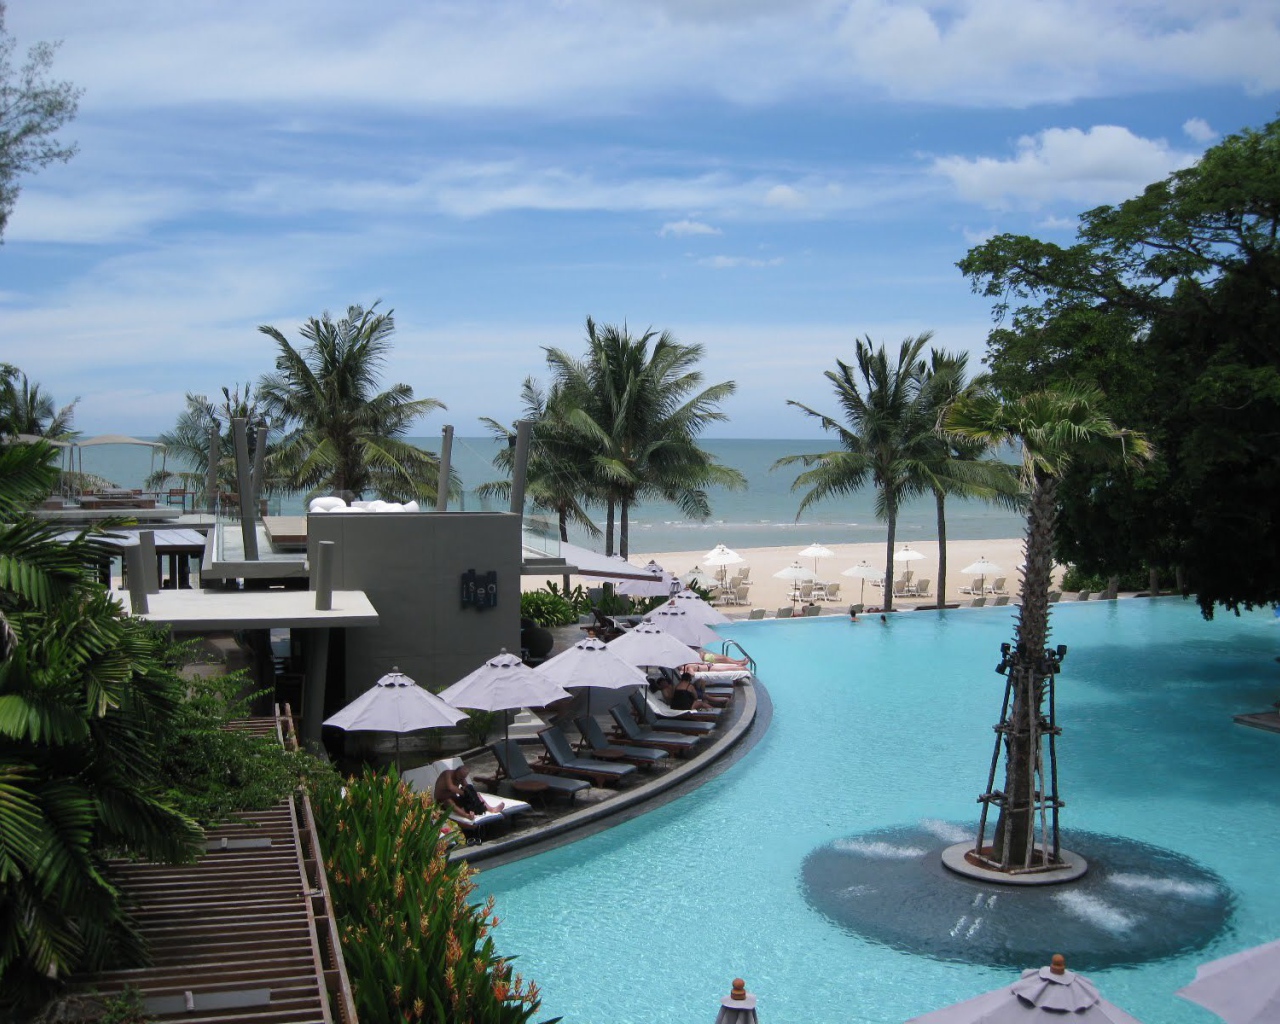 Beach holiday in the resort of Cha-am, Thailand